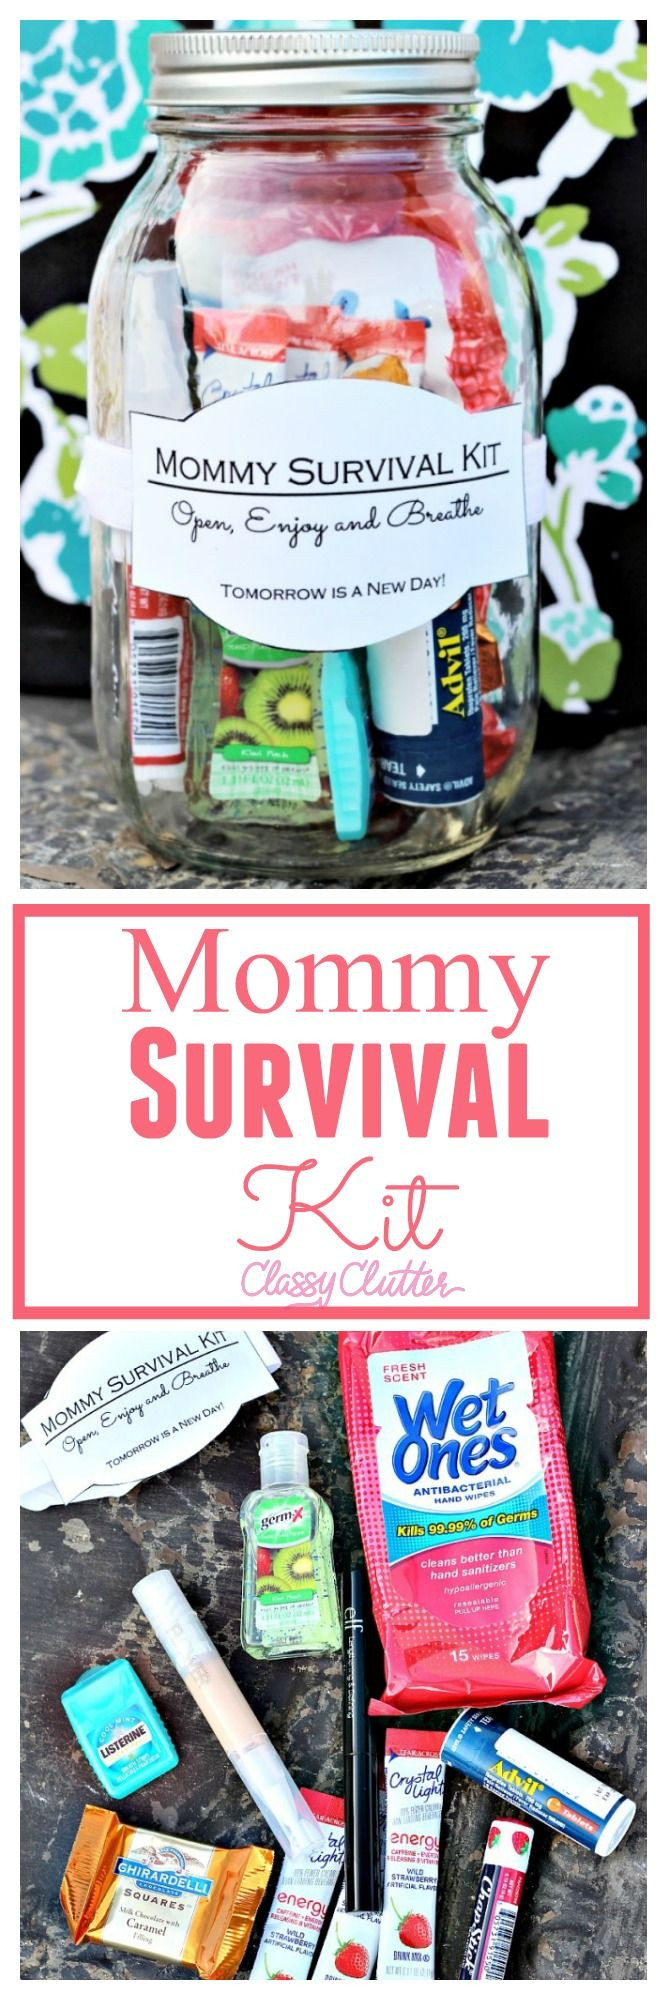 Gift Ideas For Someone Who Just Had A Baby
 17 Best ideas about Survival Kit Gifts on Pinterest